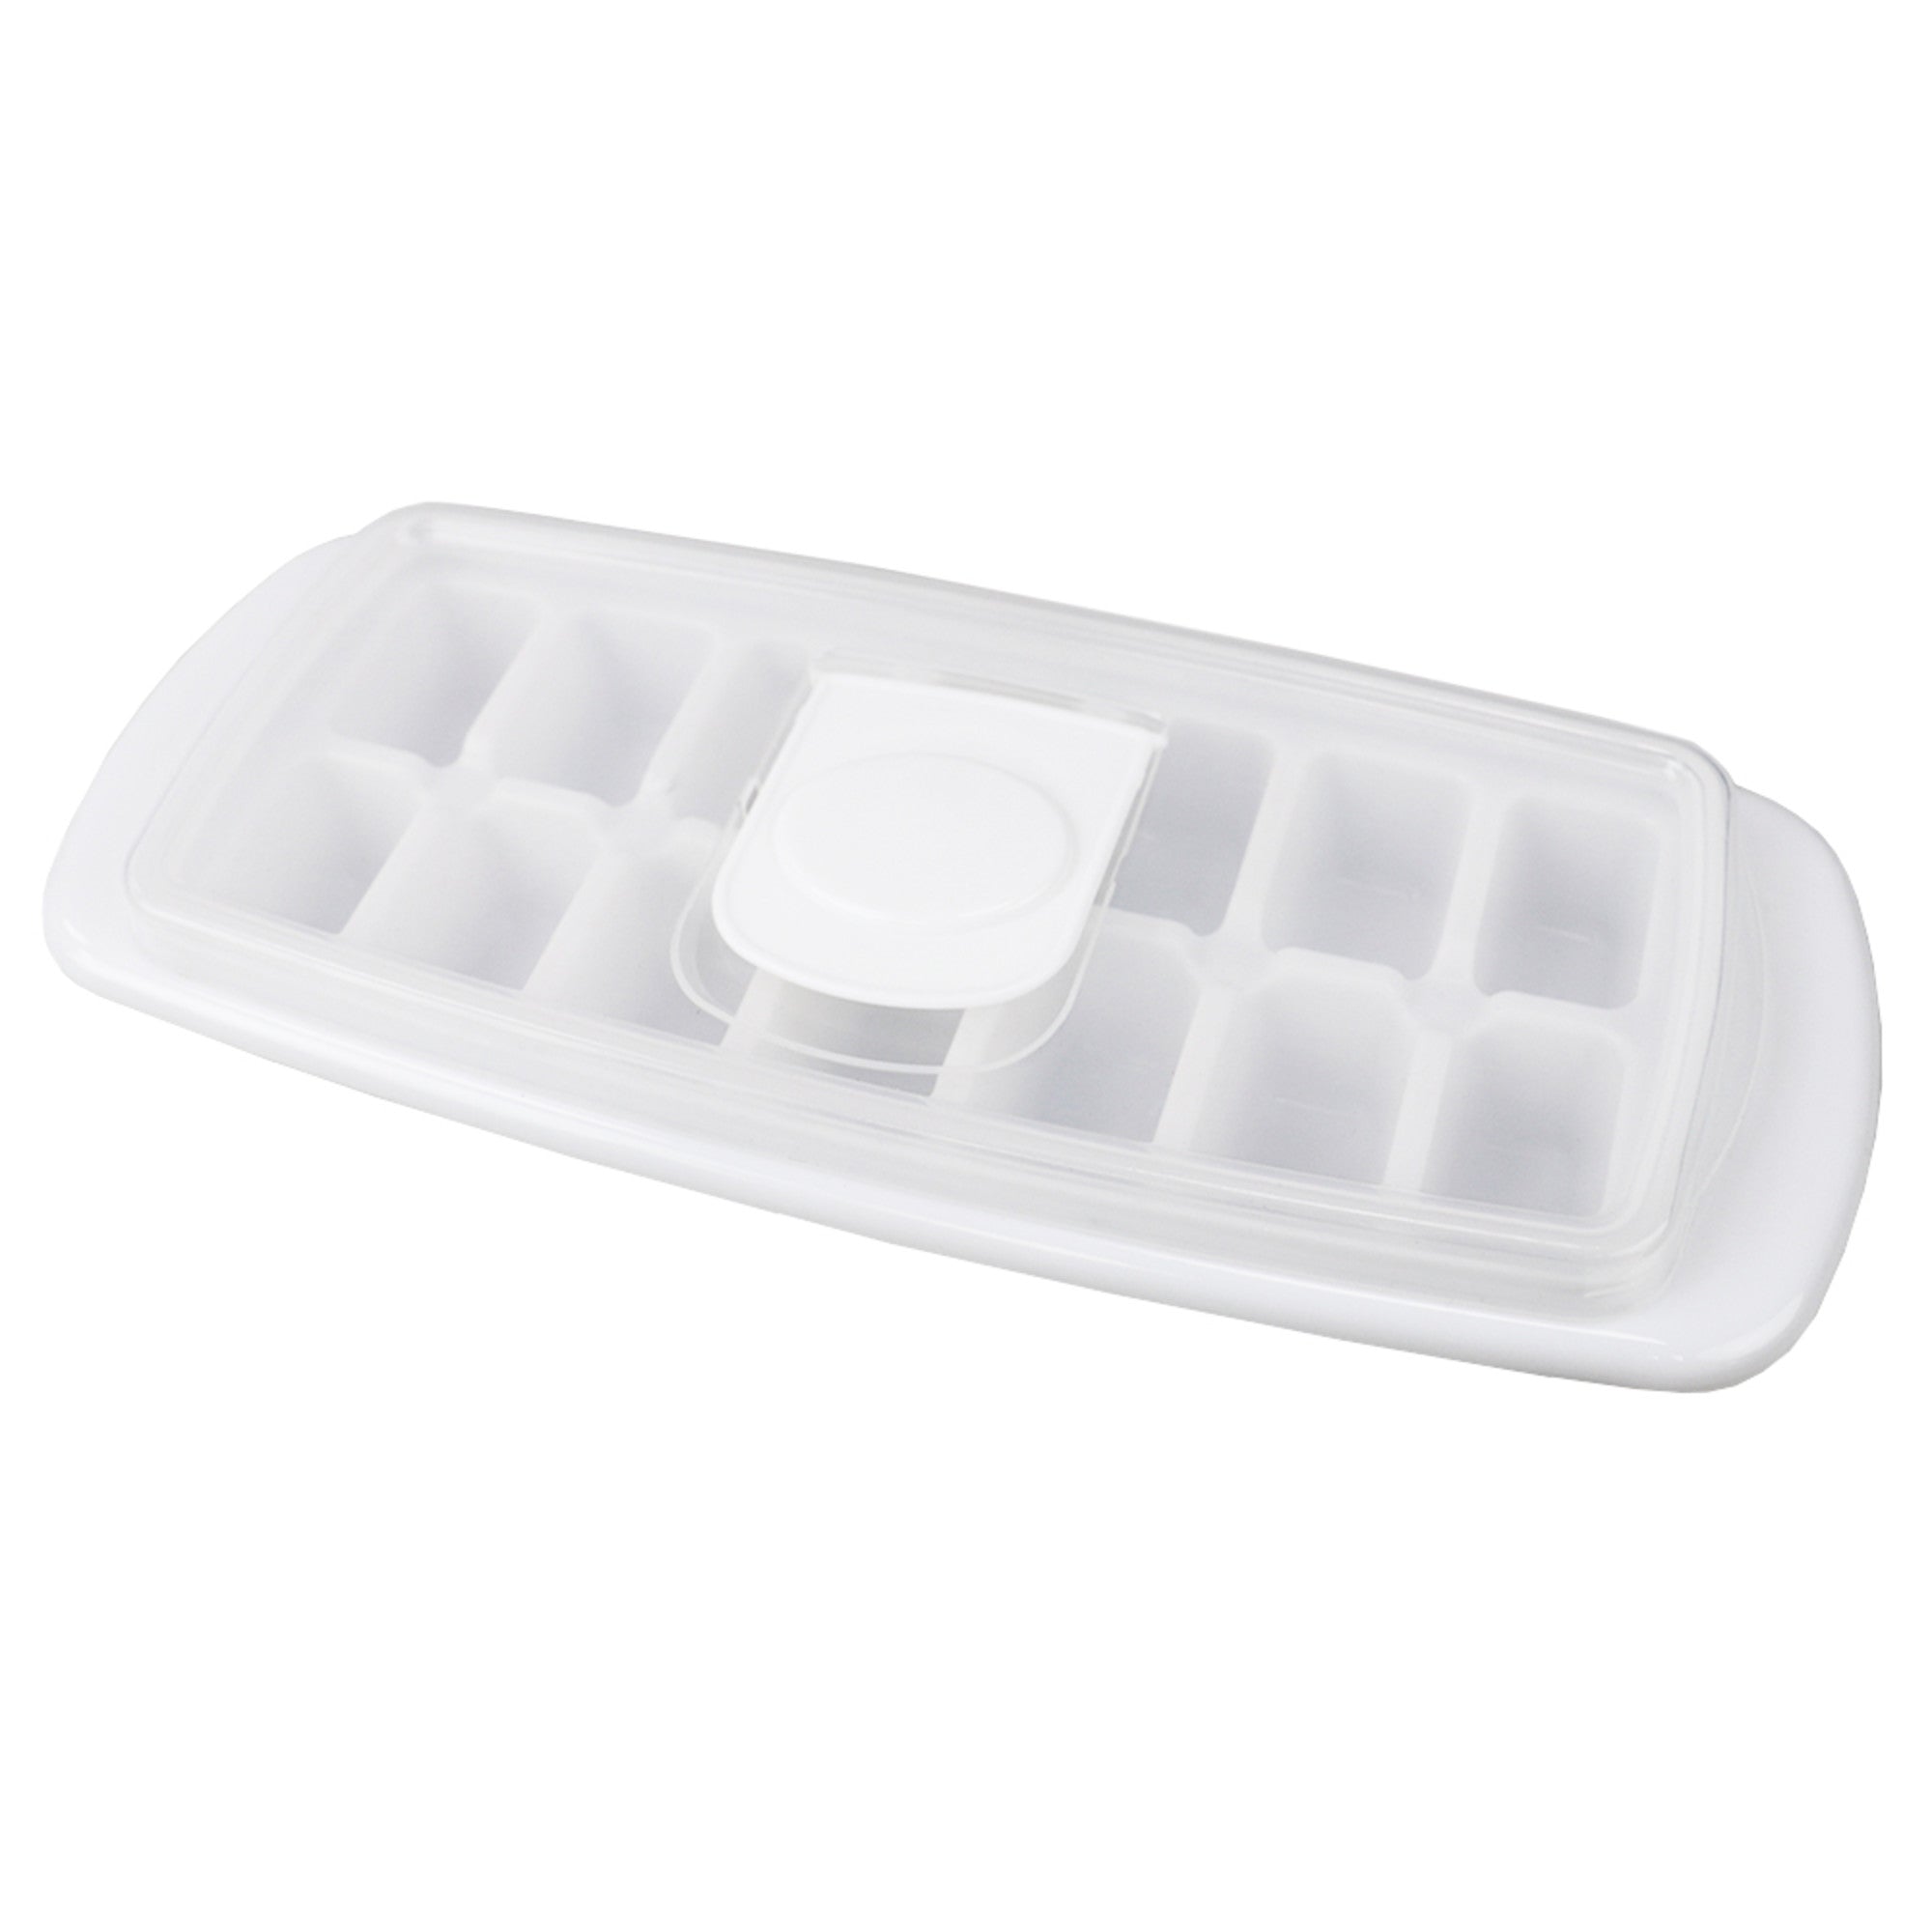 Home Basics No Spill Quick Release Stackable Plastic Ice Cube Tray with Removable Snap-on Lid - Blue